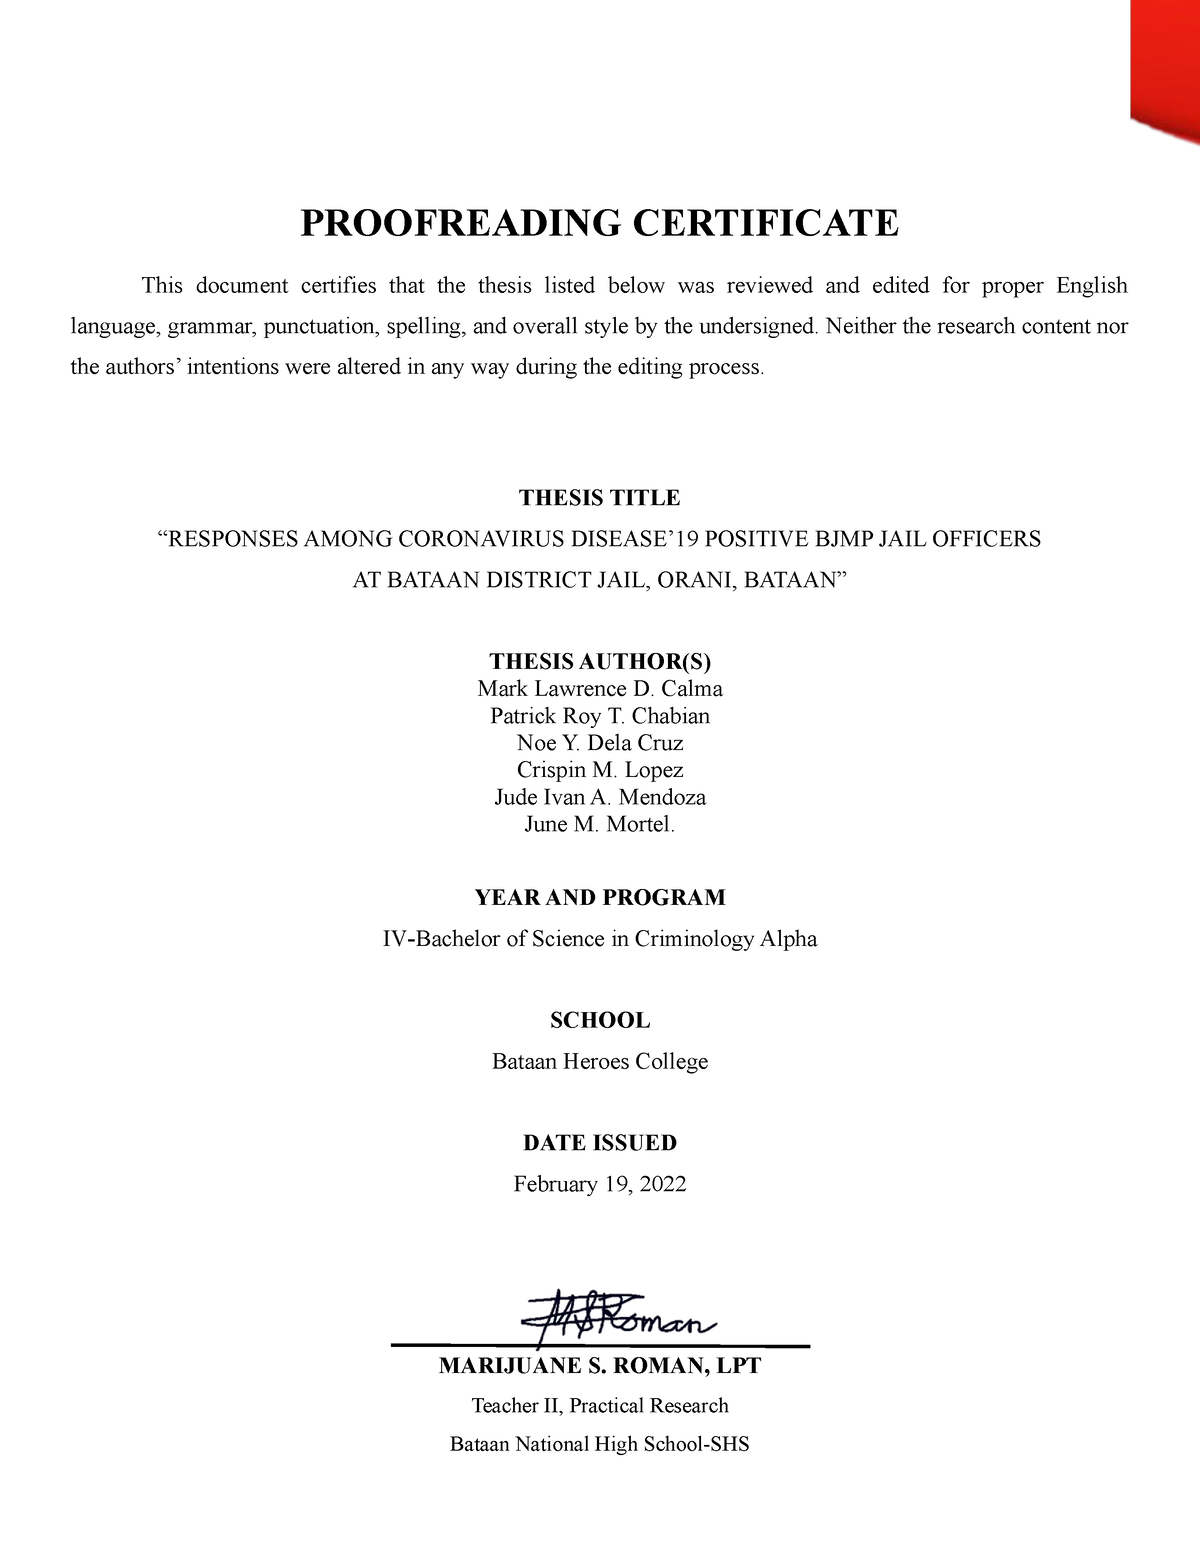 certificate of proofreading thesis